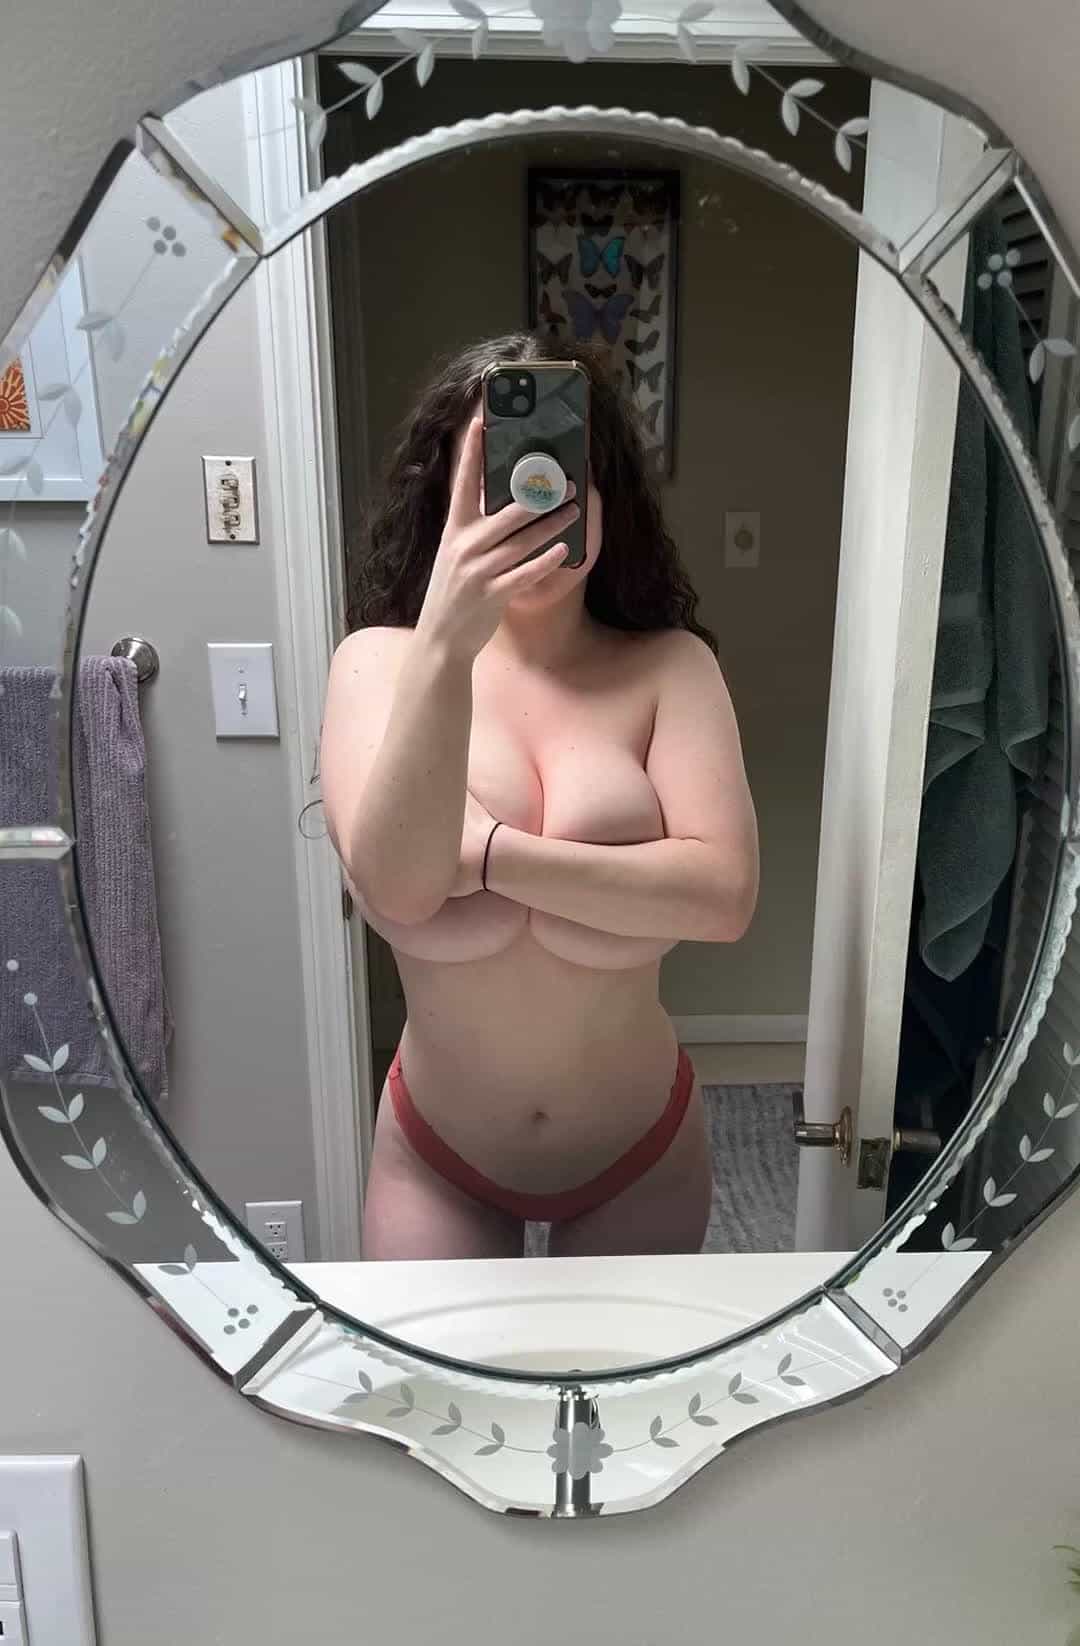 Just turned 18 and my boobs won't stop growing... are they too big for my 4'9 body?